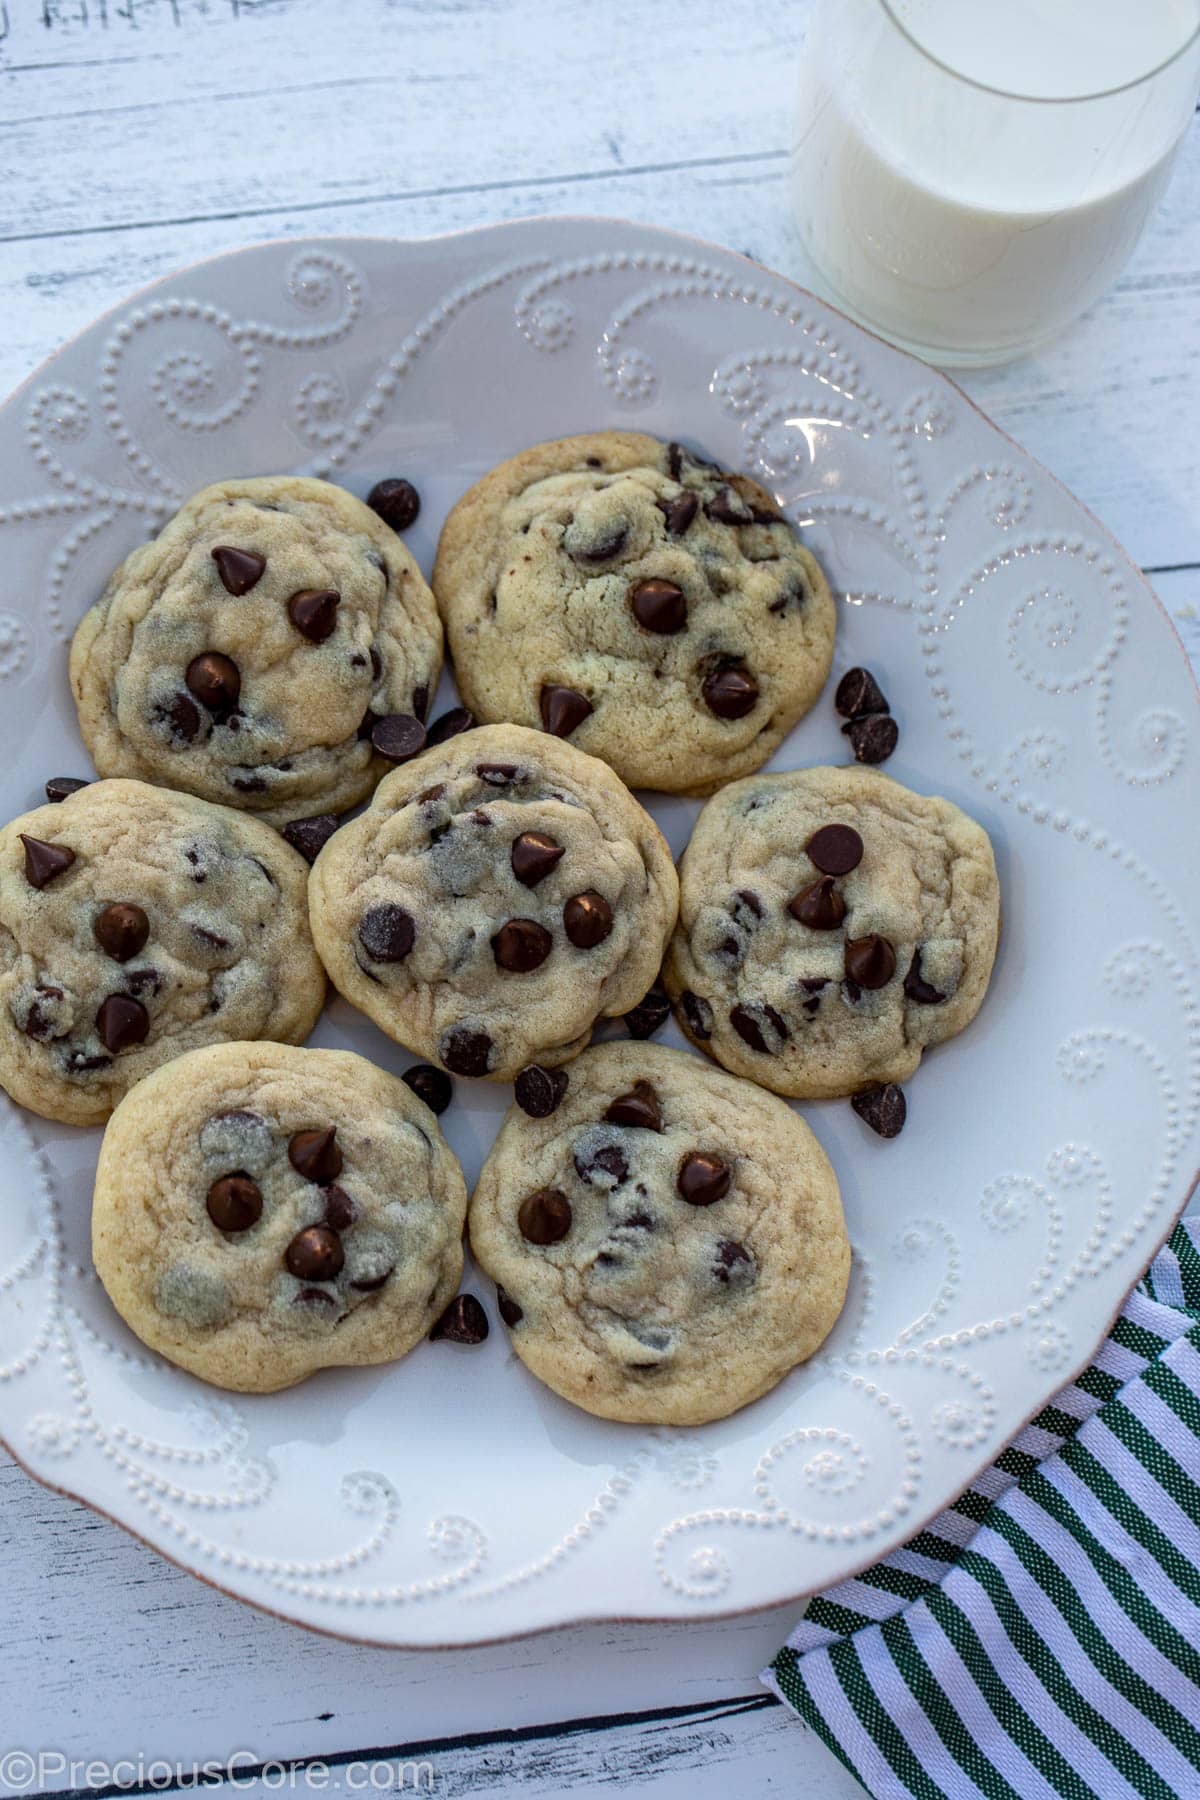 A plate of chocolate chip cookies, a dish cloth nearby and a glass of milk.